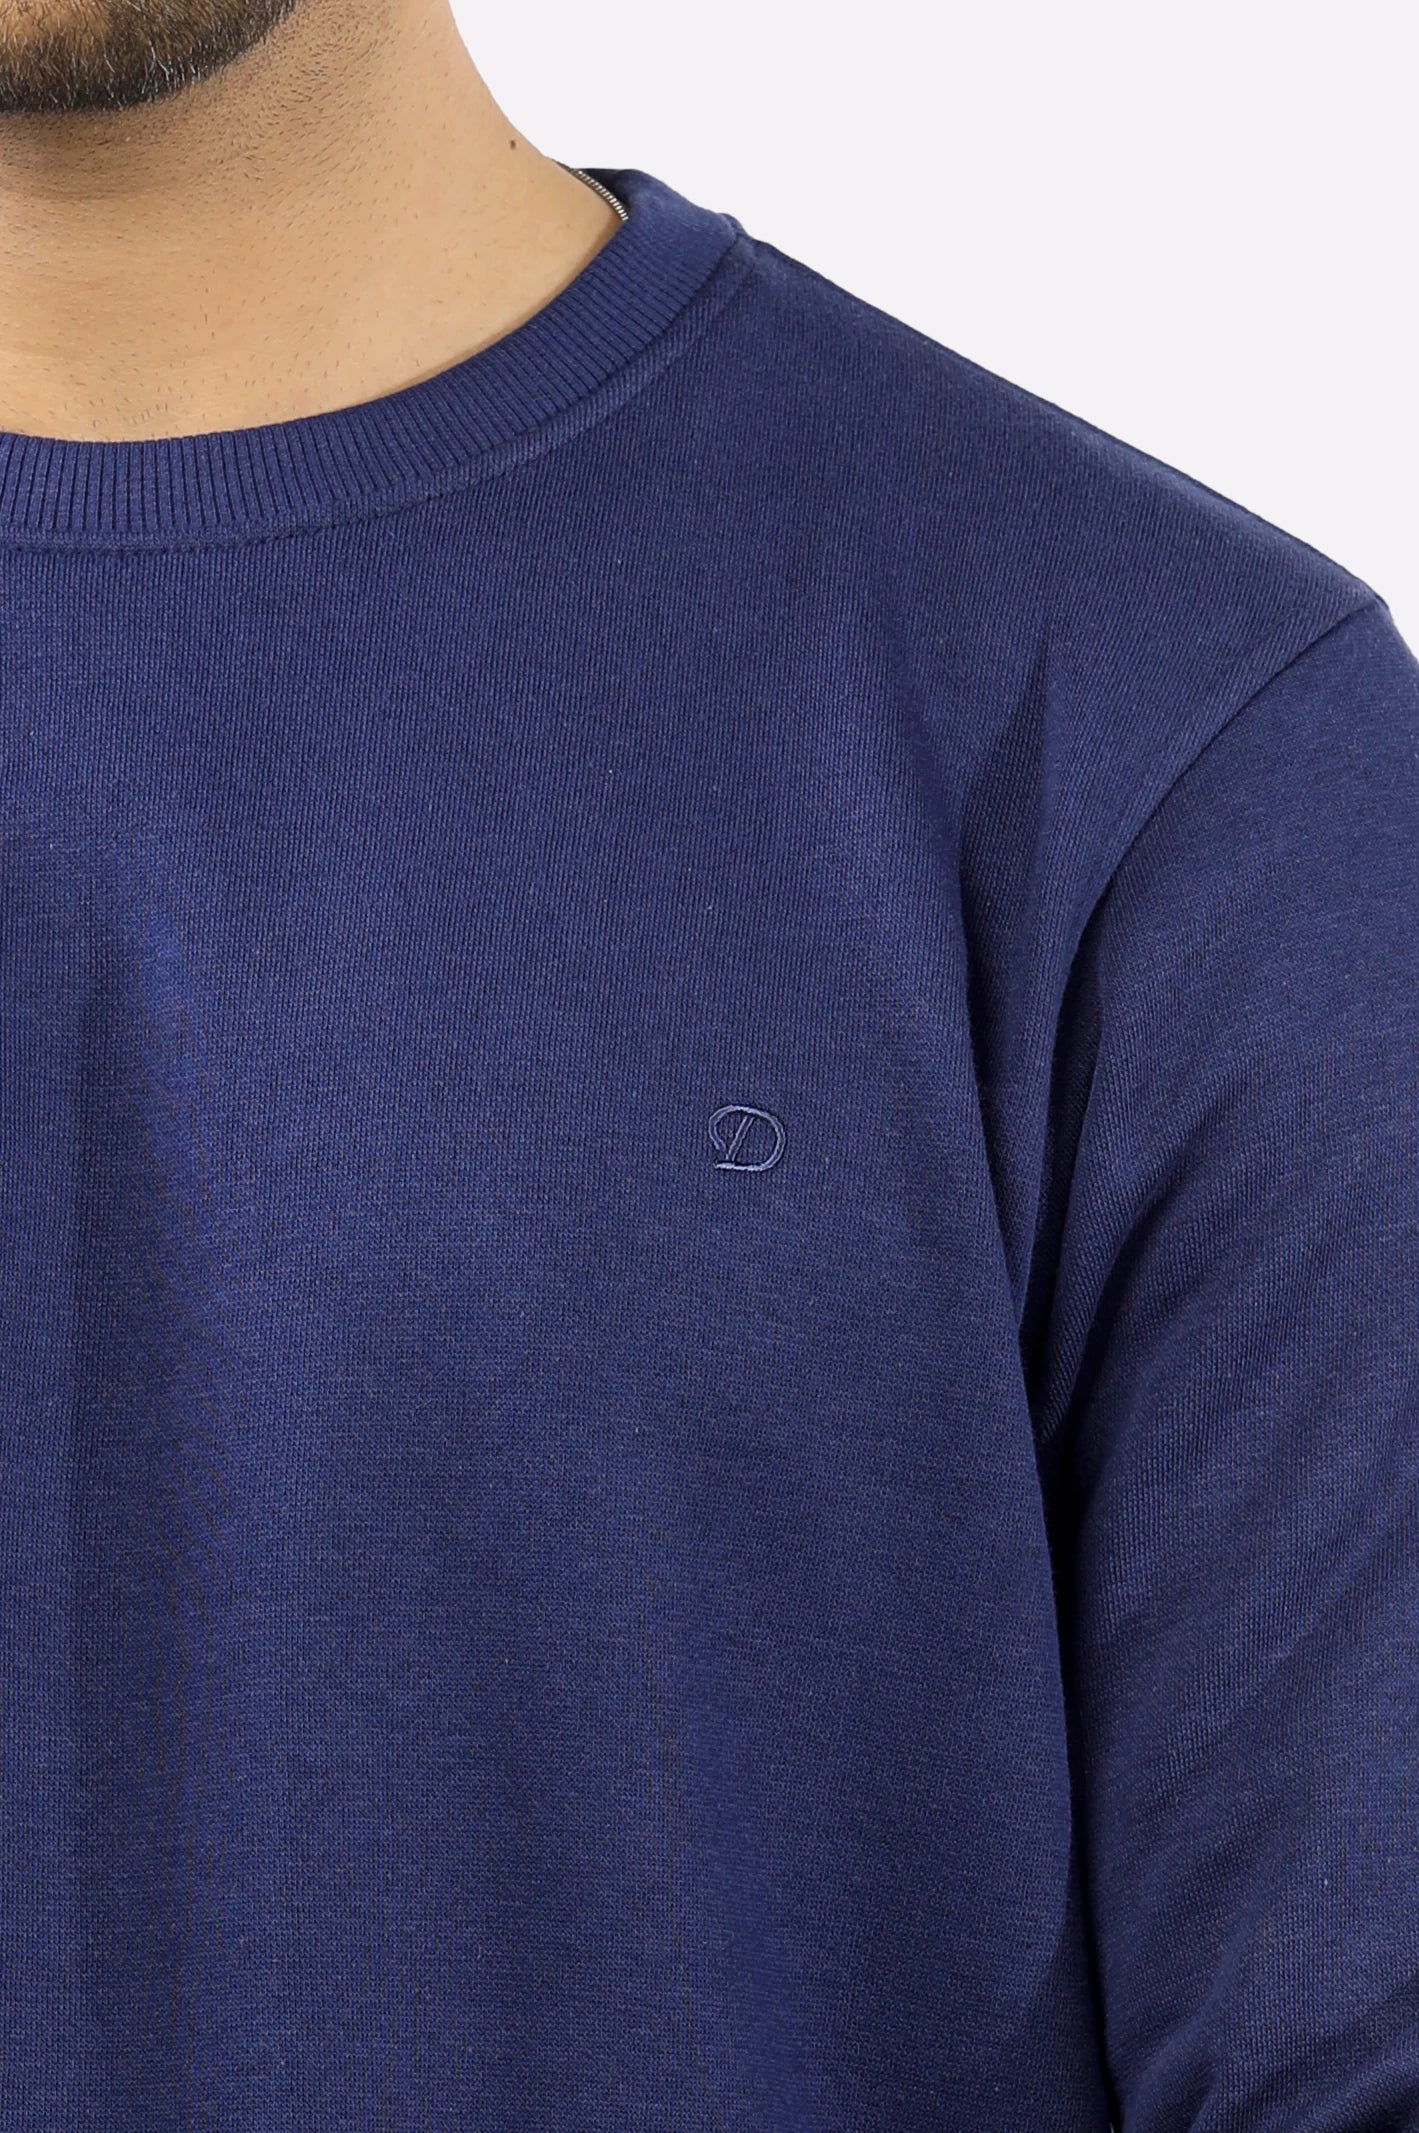 Navy Blue Basic Sweatshirt From Diners